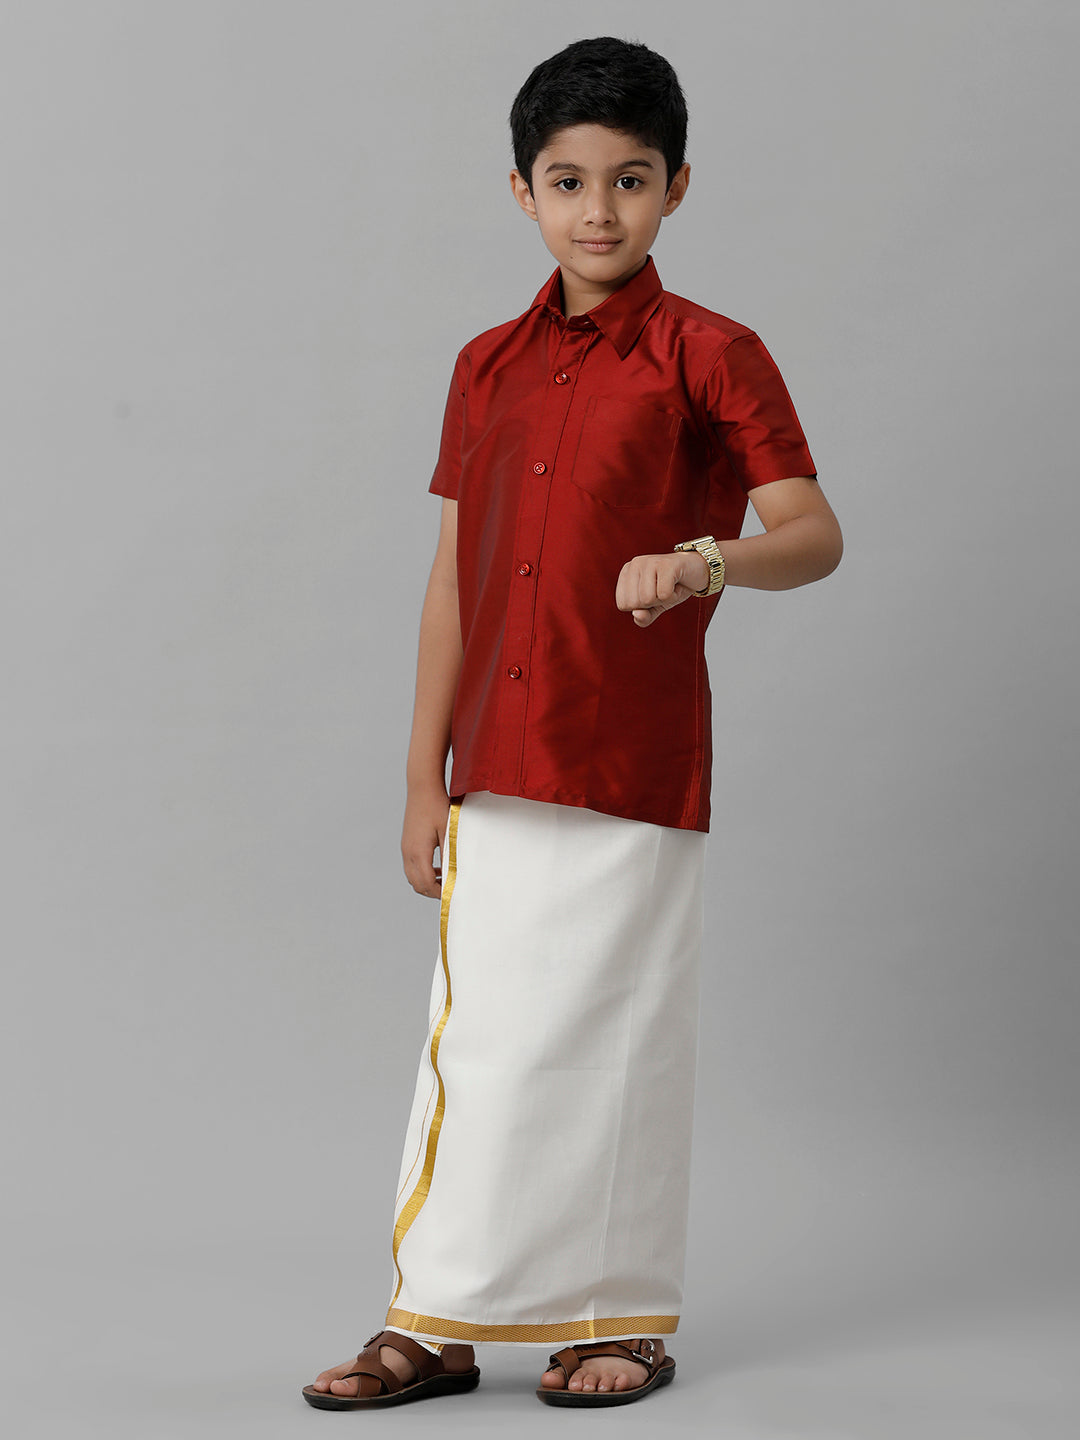 Boys Silk Cotton Red Half Sleeves Shirt with Adjustable Cream Dhoti Combo K8-Front view